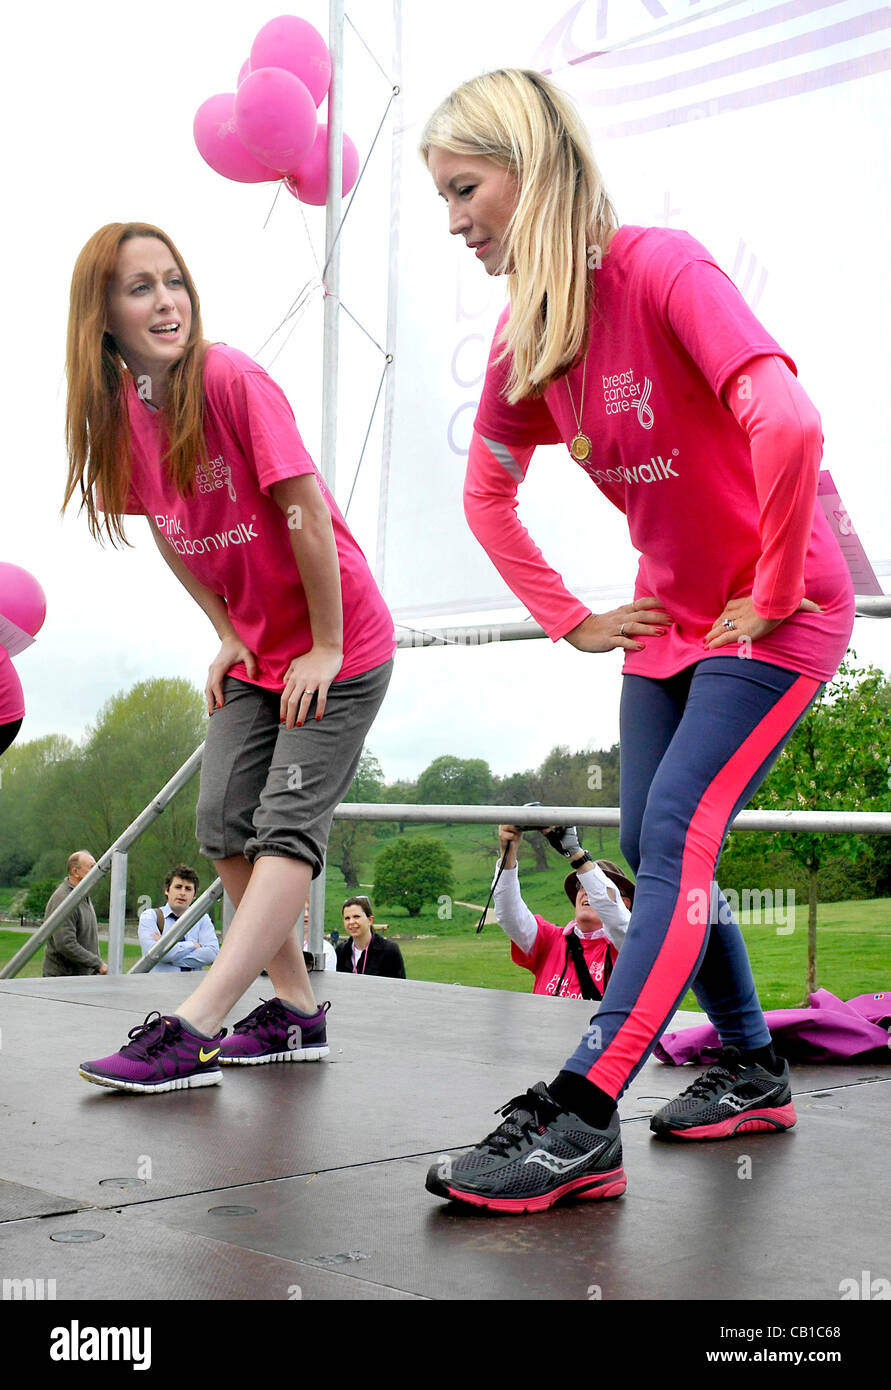 Blenheim Palace, England - Denise Van Outen and Siobhan Donaghy at the Pink Ribbonwalk at Blenheim Palace, Woodstock, Oxfordshire - May 19th 2012  Photo by People Press Stock Photo